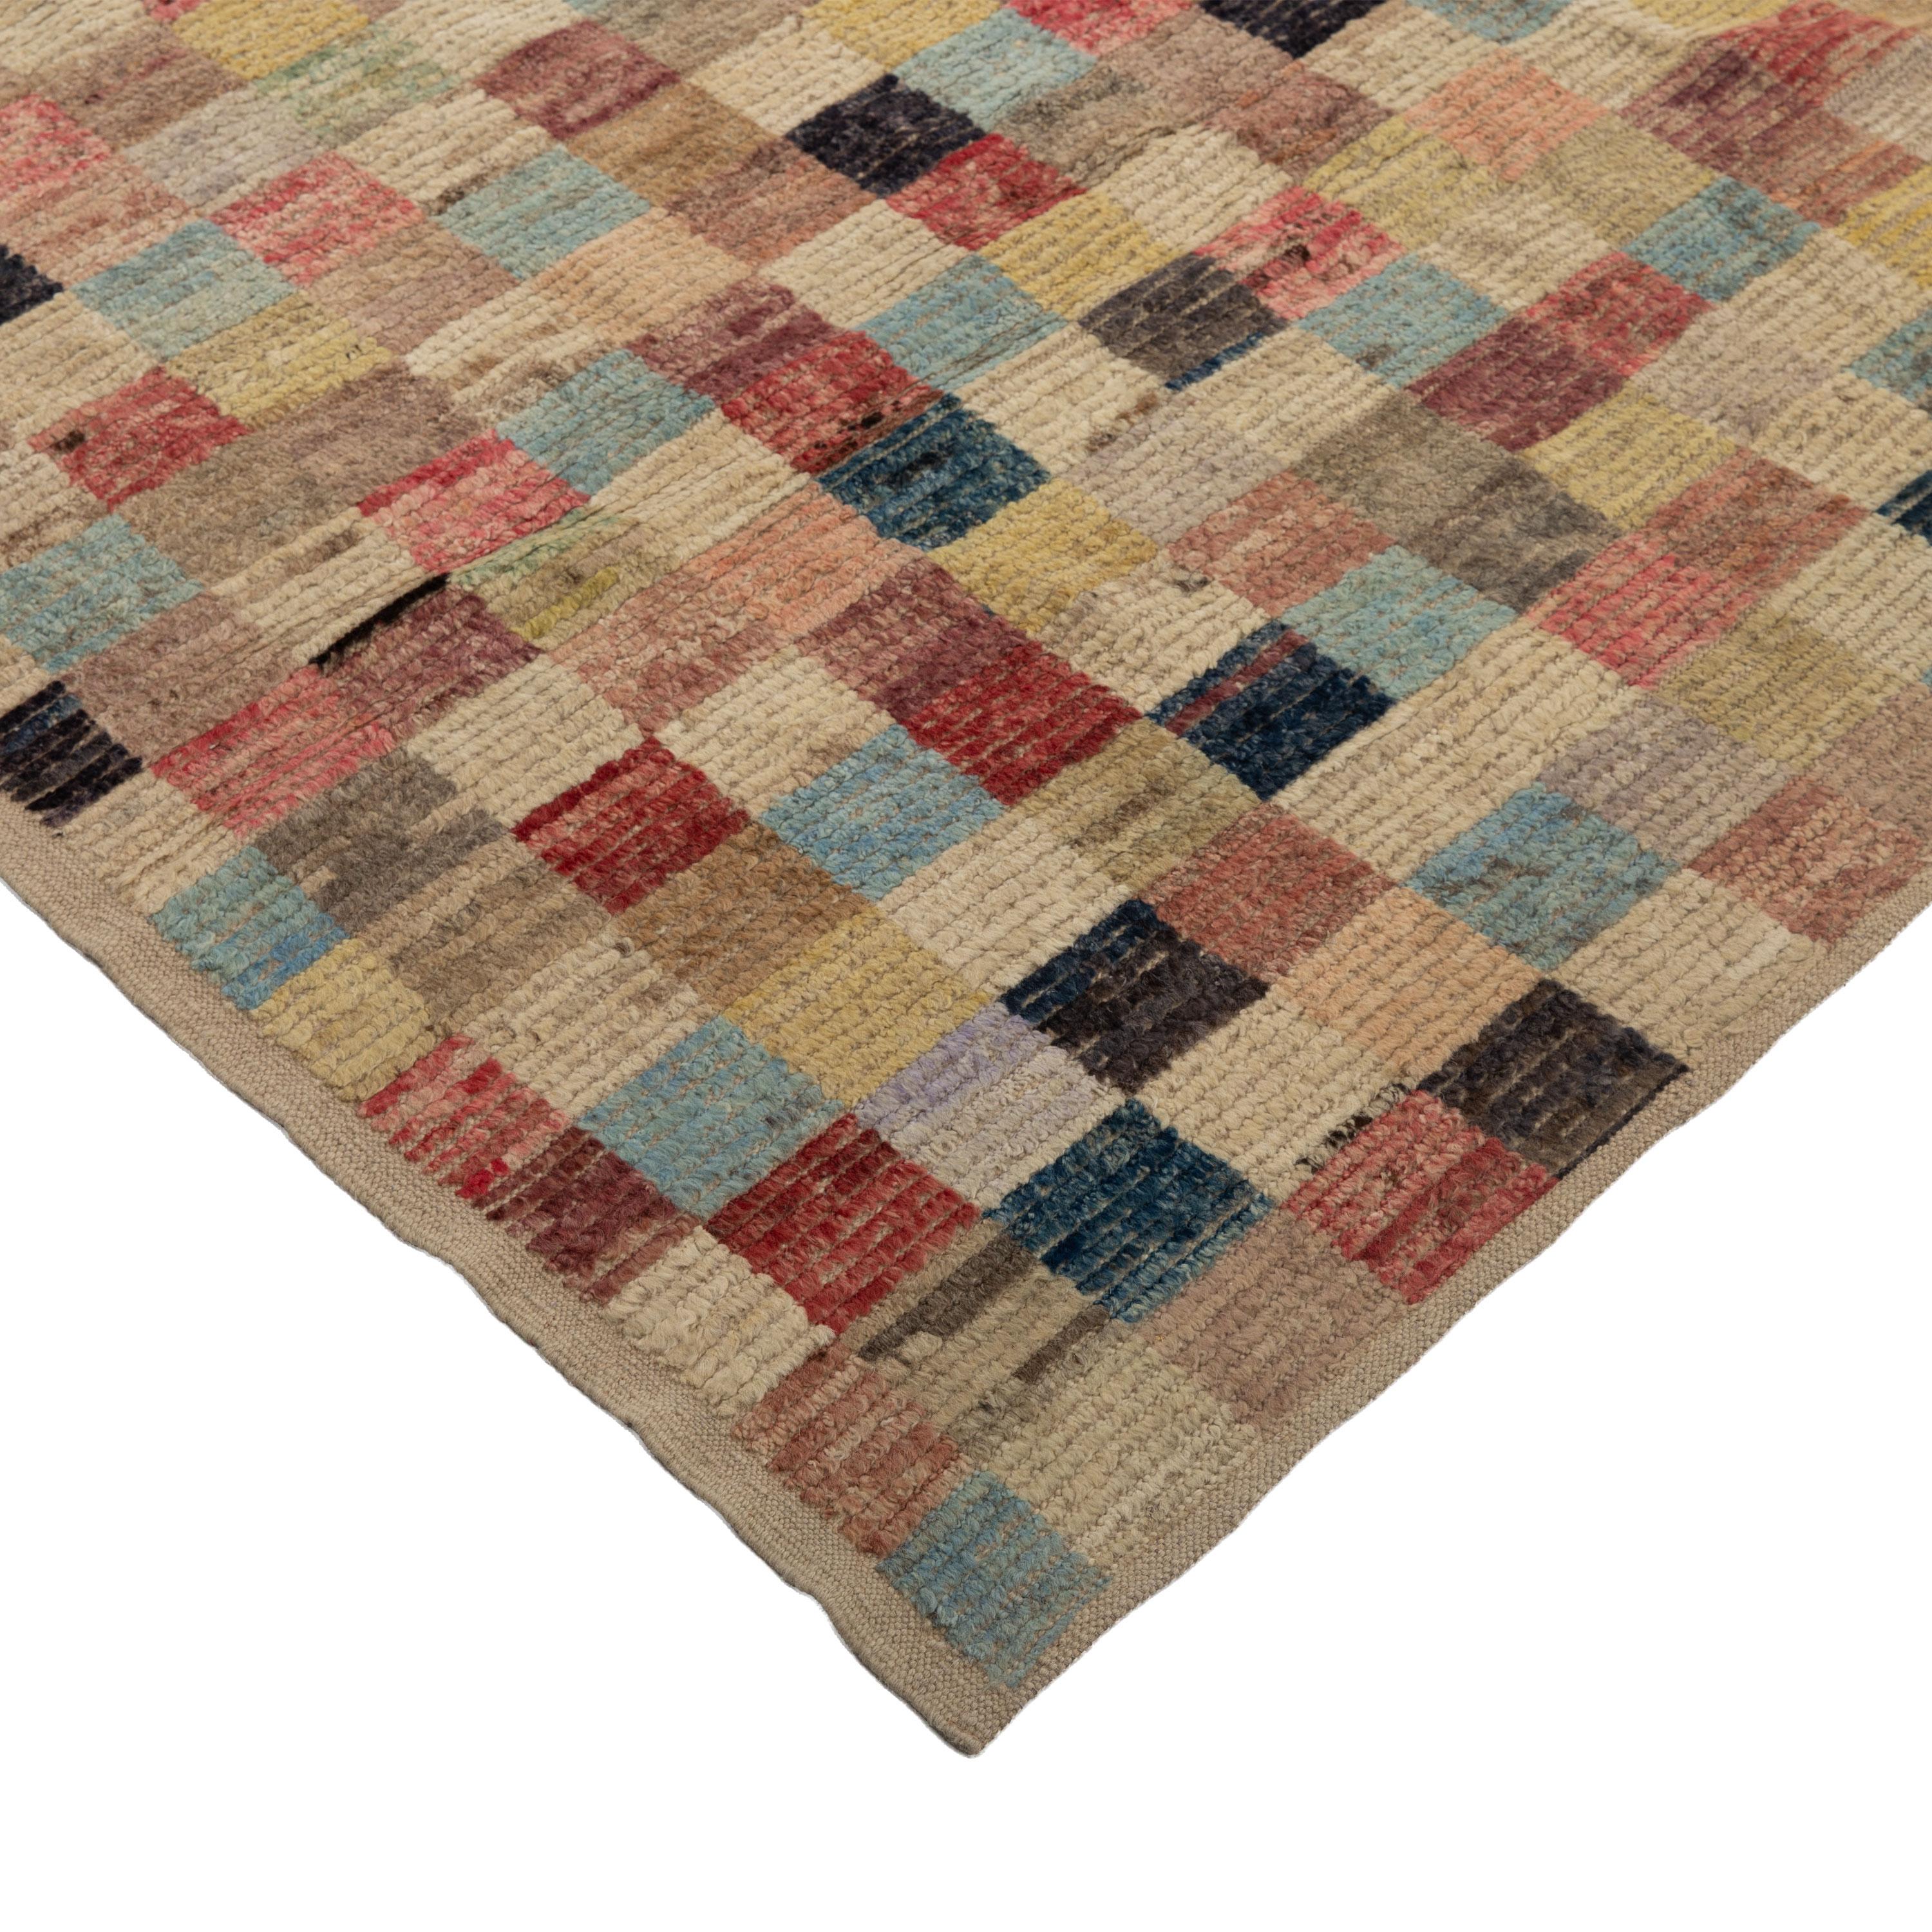 Afghan abc carpet Multicolored Zameen Transitional Wool Rug - 14'4